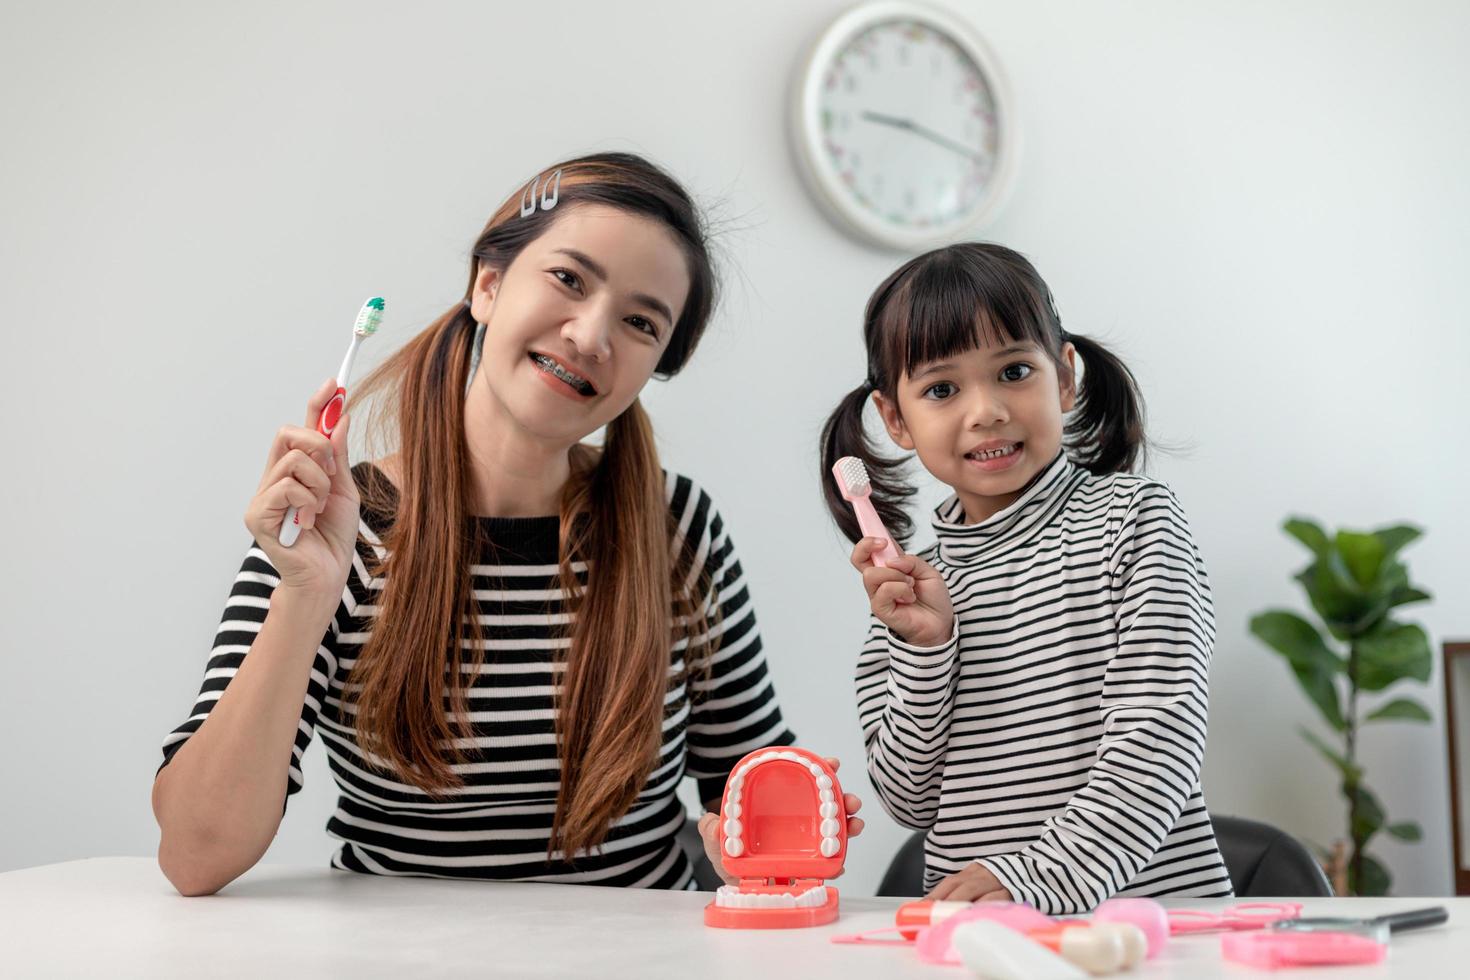 Happy family and health. mother and daughter girl brushing their teeth together photo